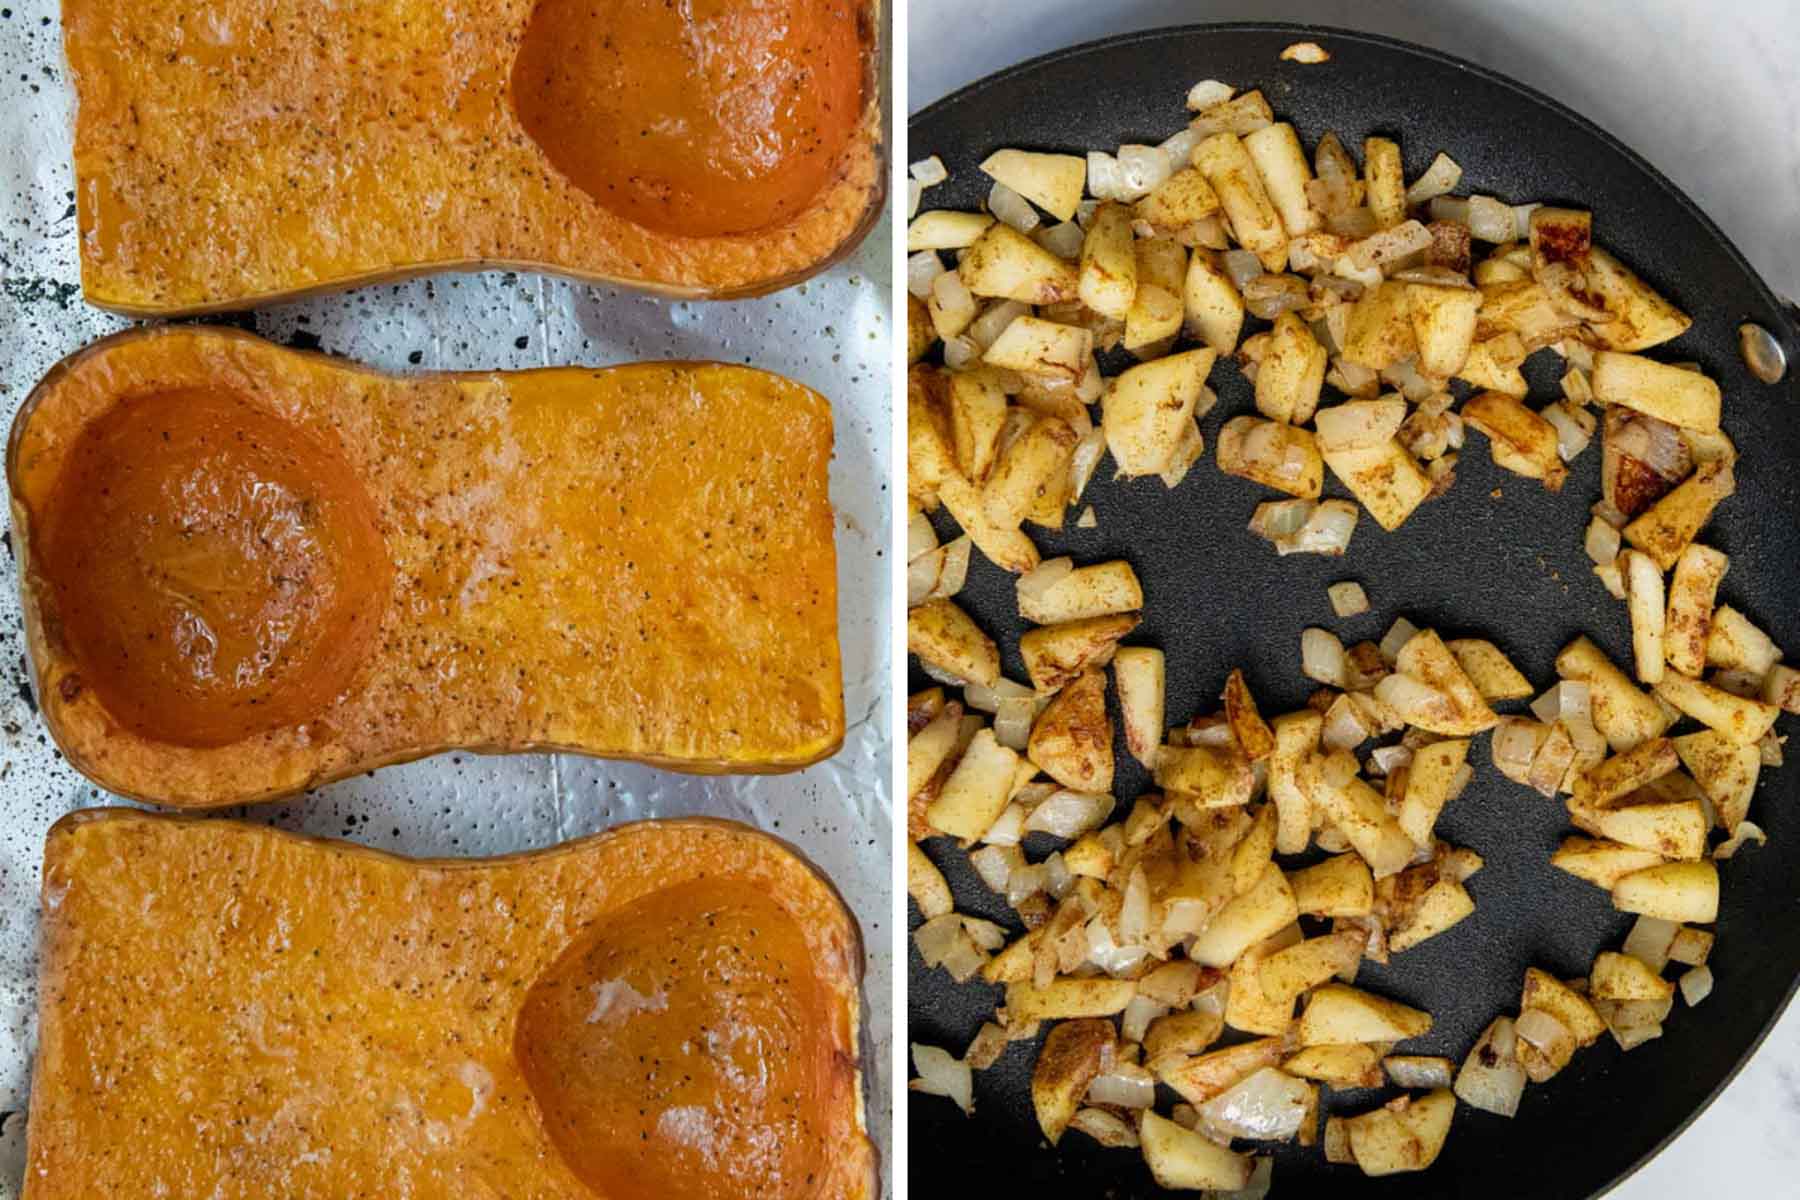 images showing roasted squash and sauteed apples